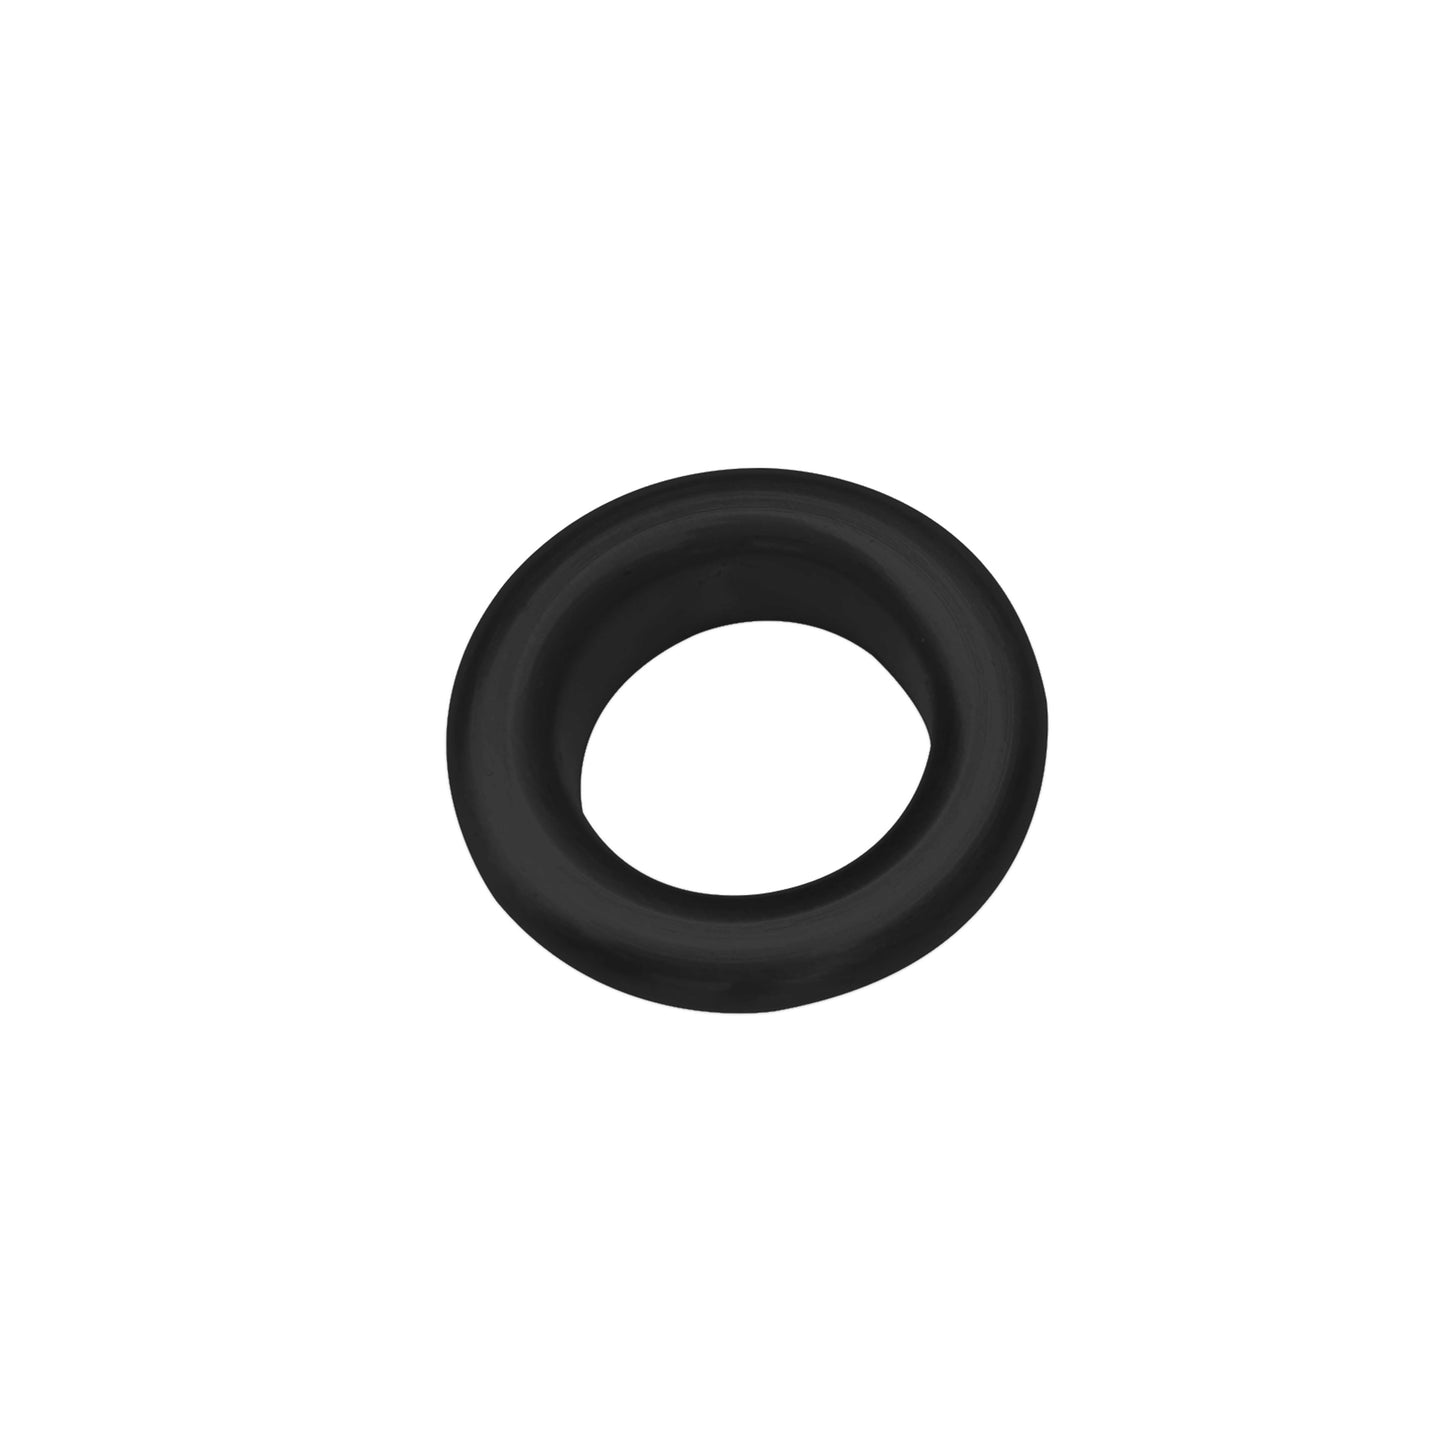 Vares-A Round Basin Overflow Cover - Black